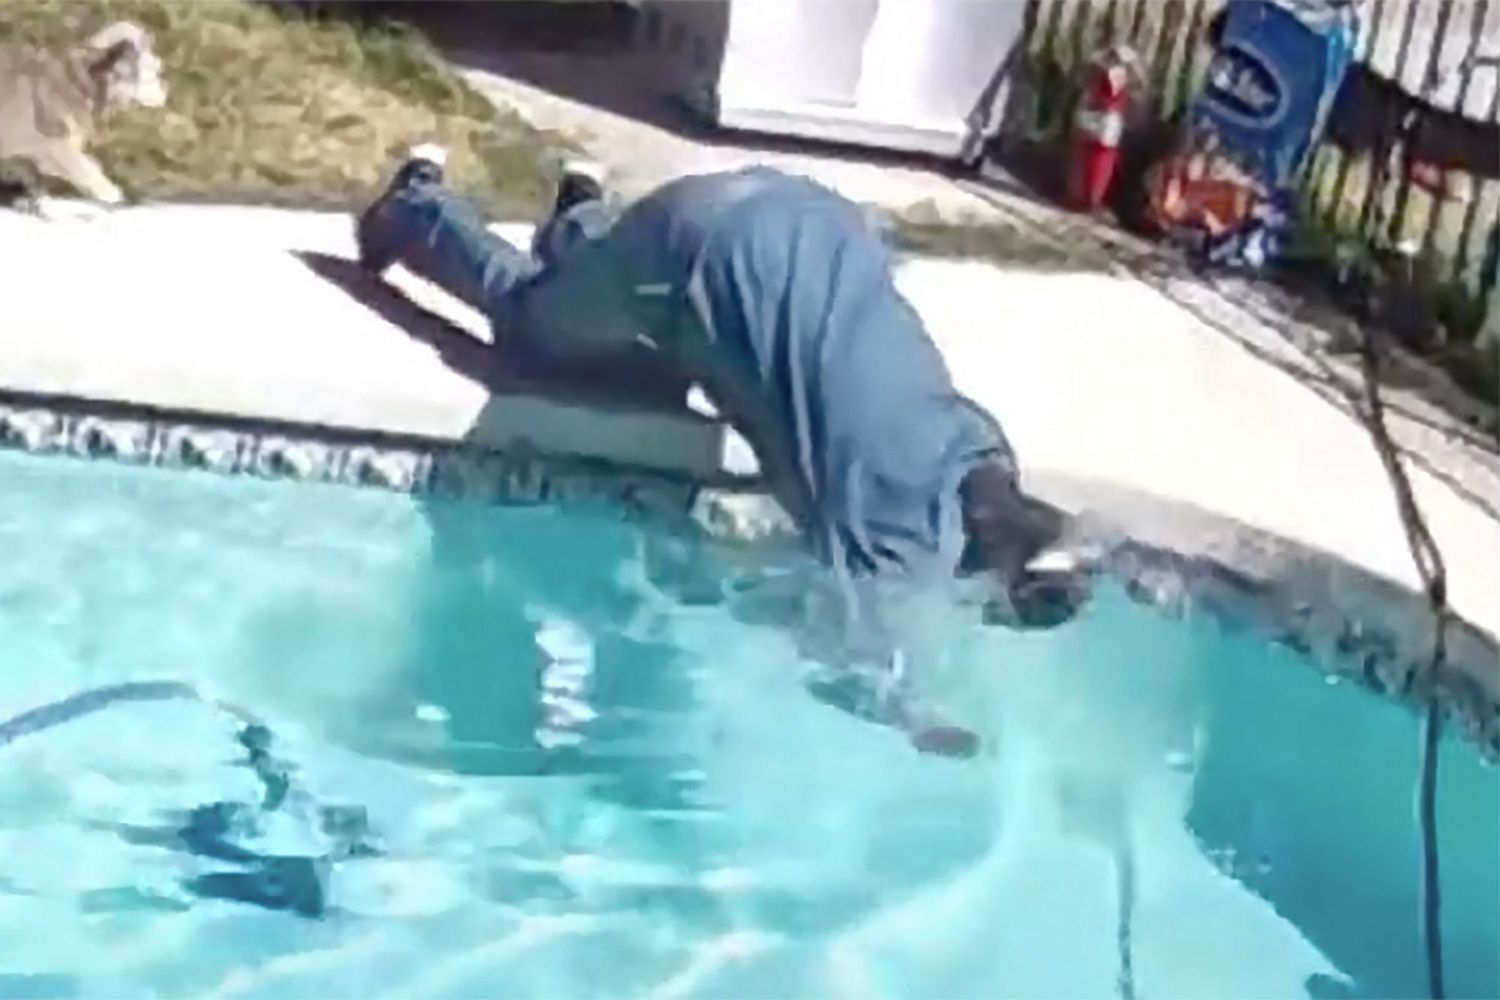 man falls in pool after pup